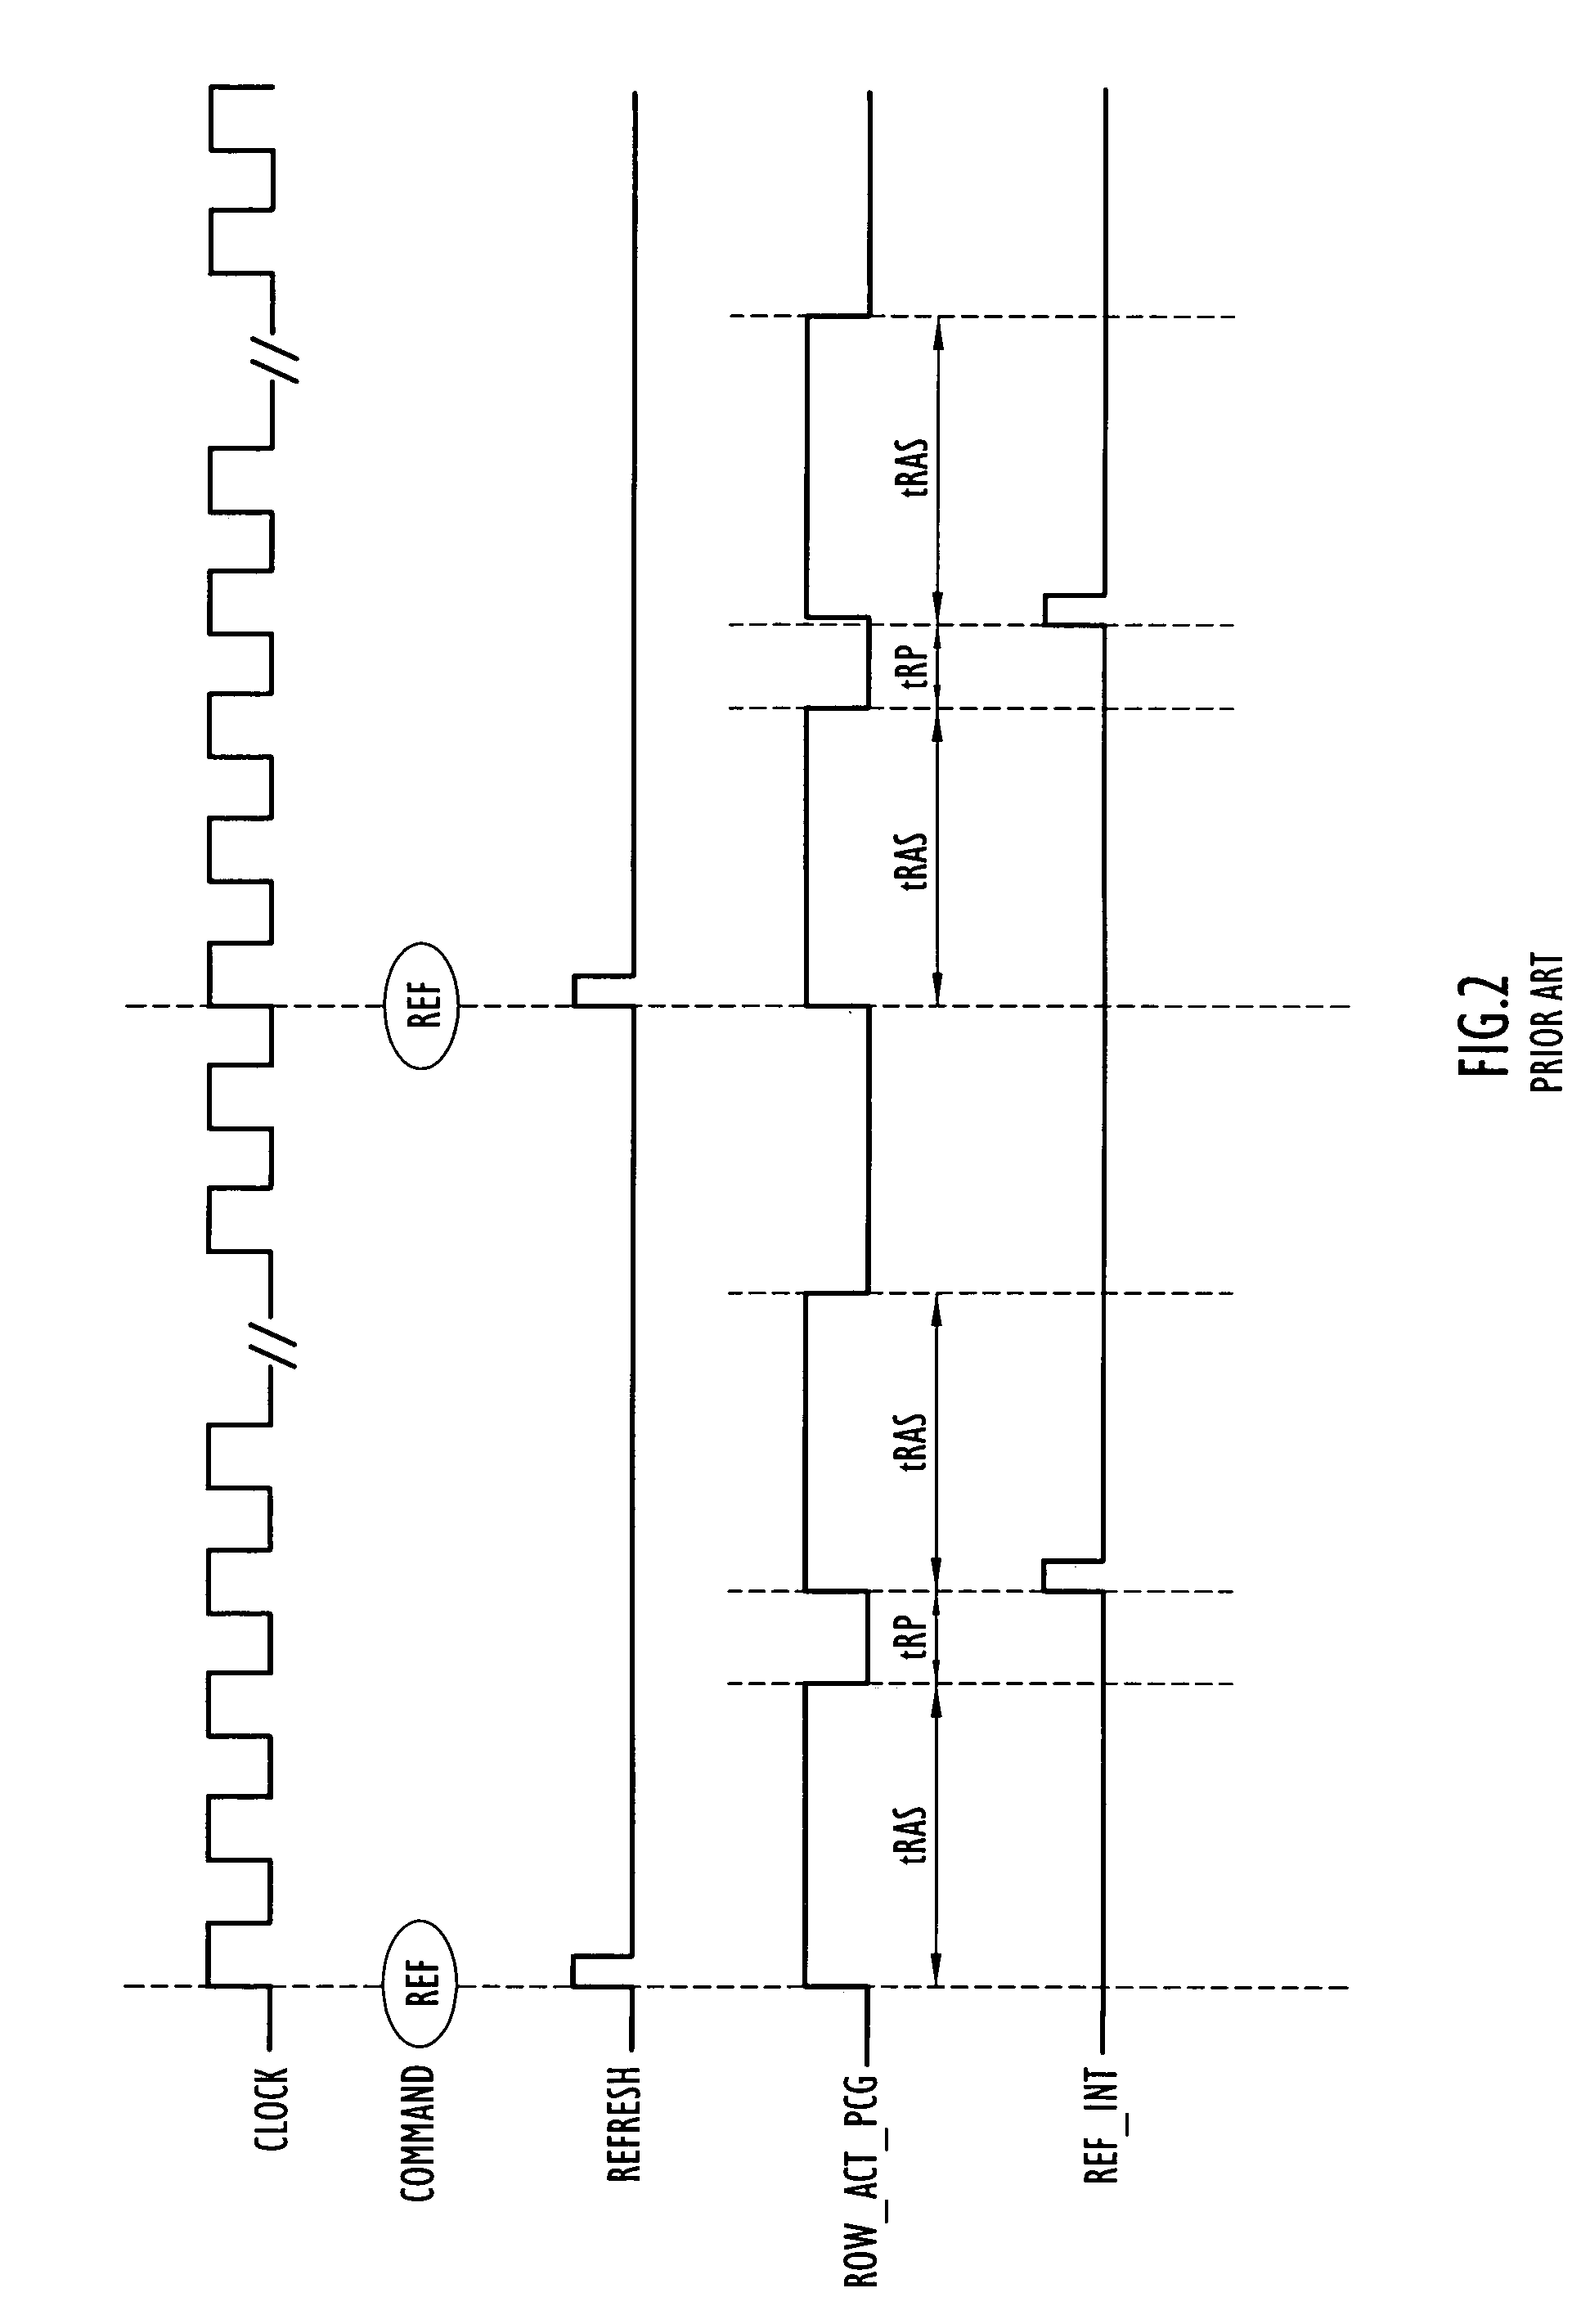 Method and apparatus for controlling refresh cycles of a plural cycle refresh scheme in a dynamic memory